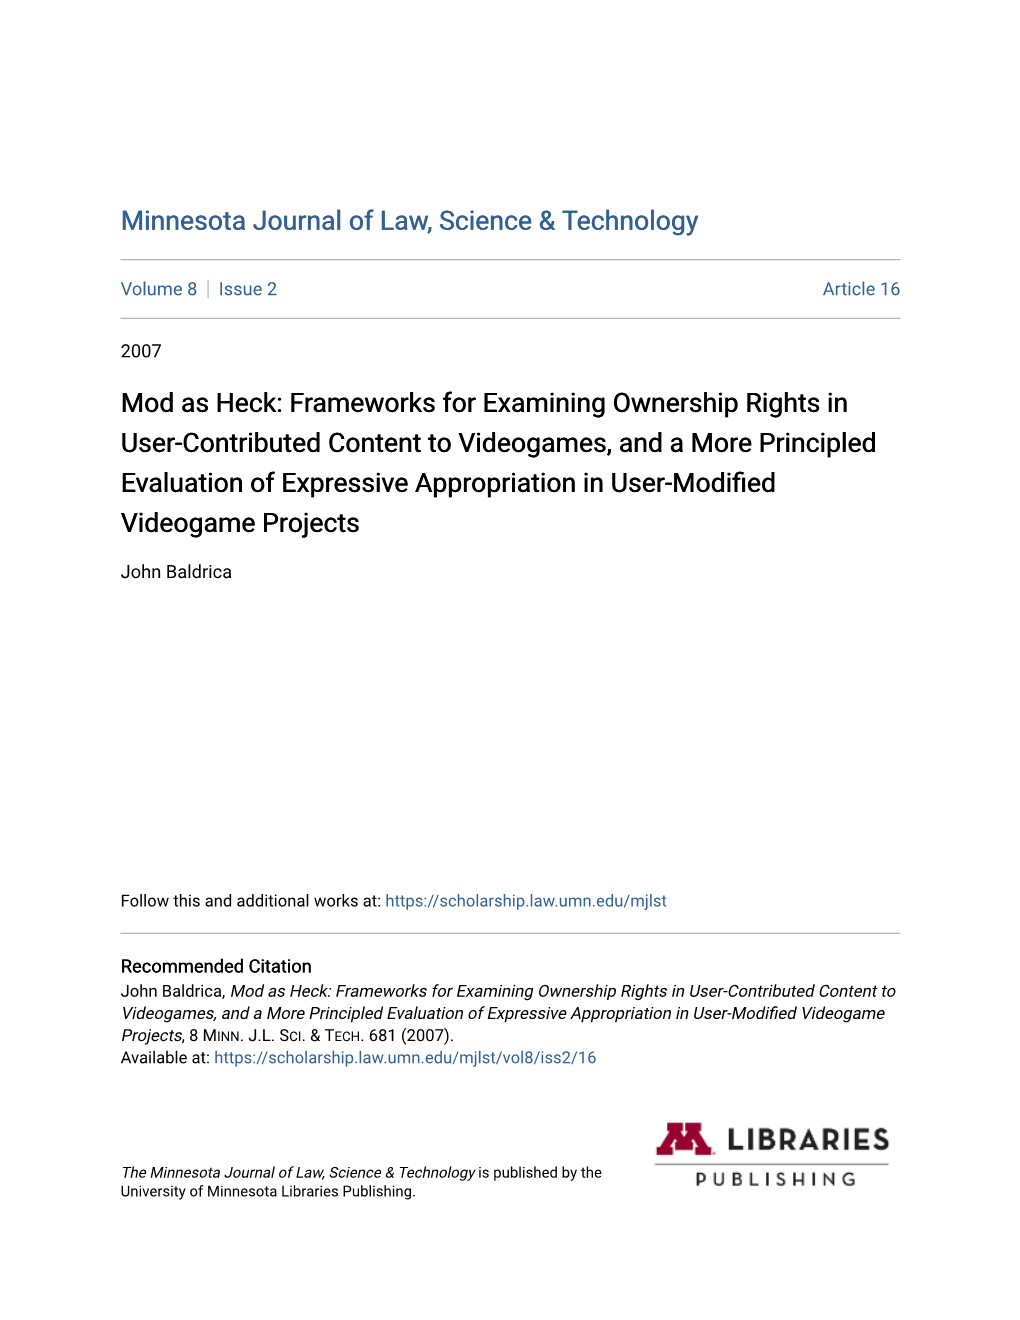 Mod As Heck: Frameworks for Examining Ownership Rights In